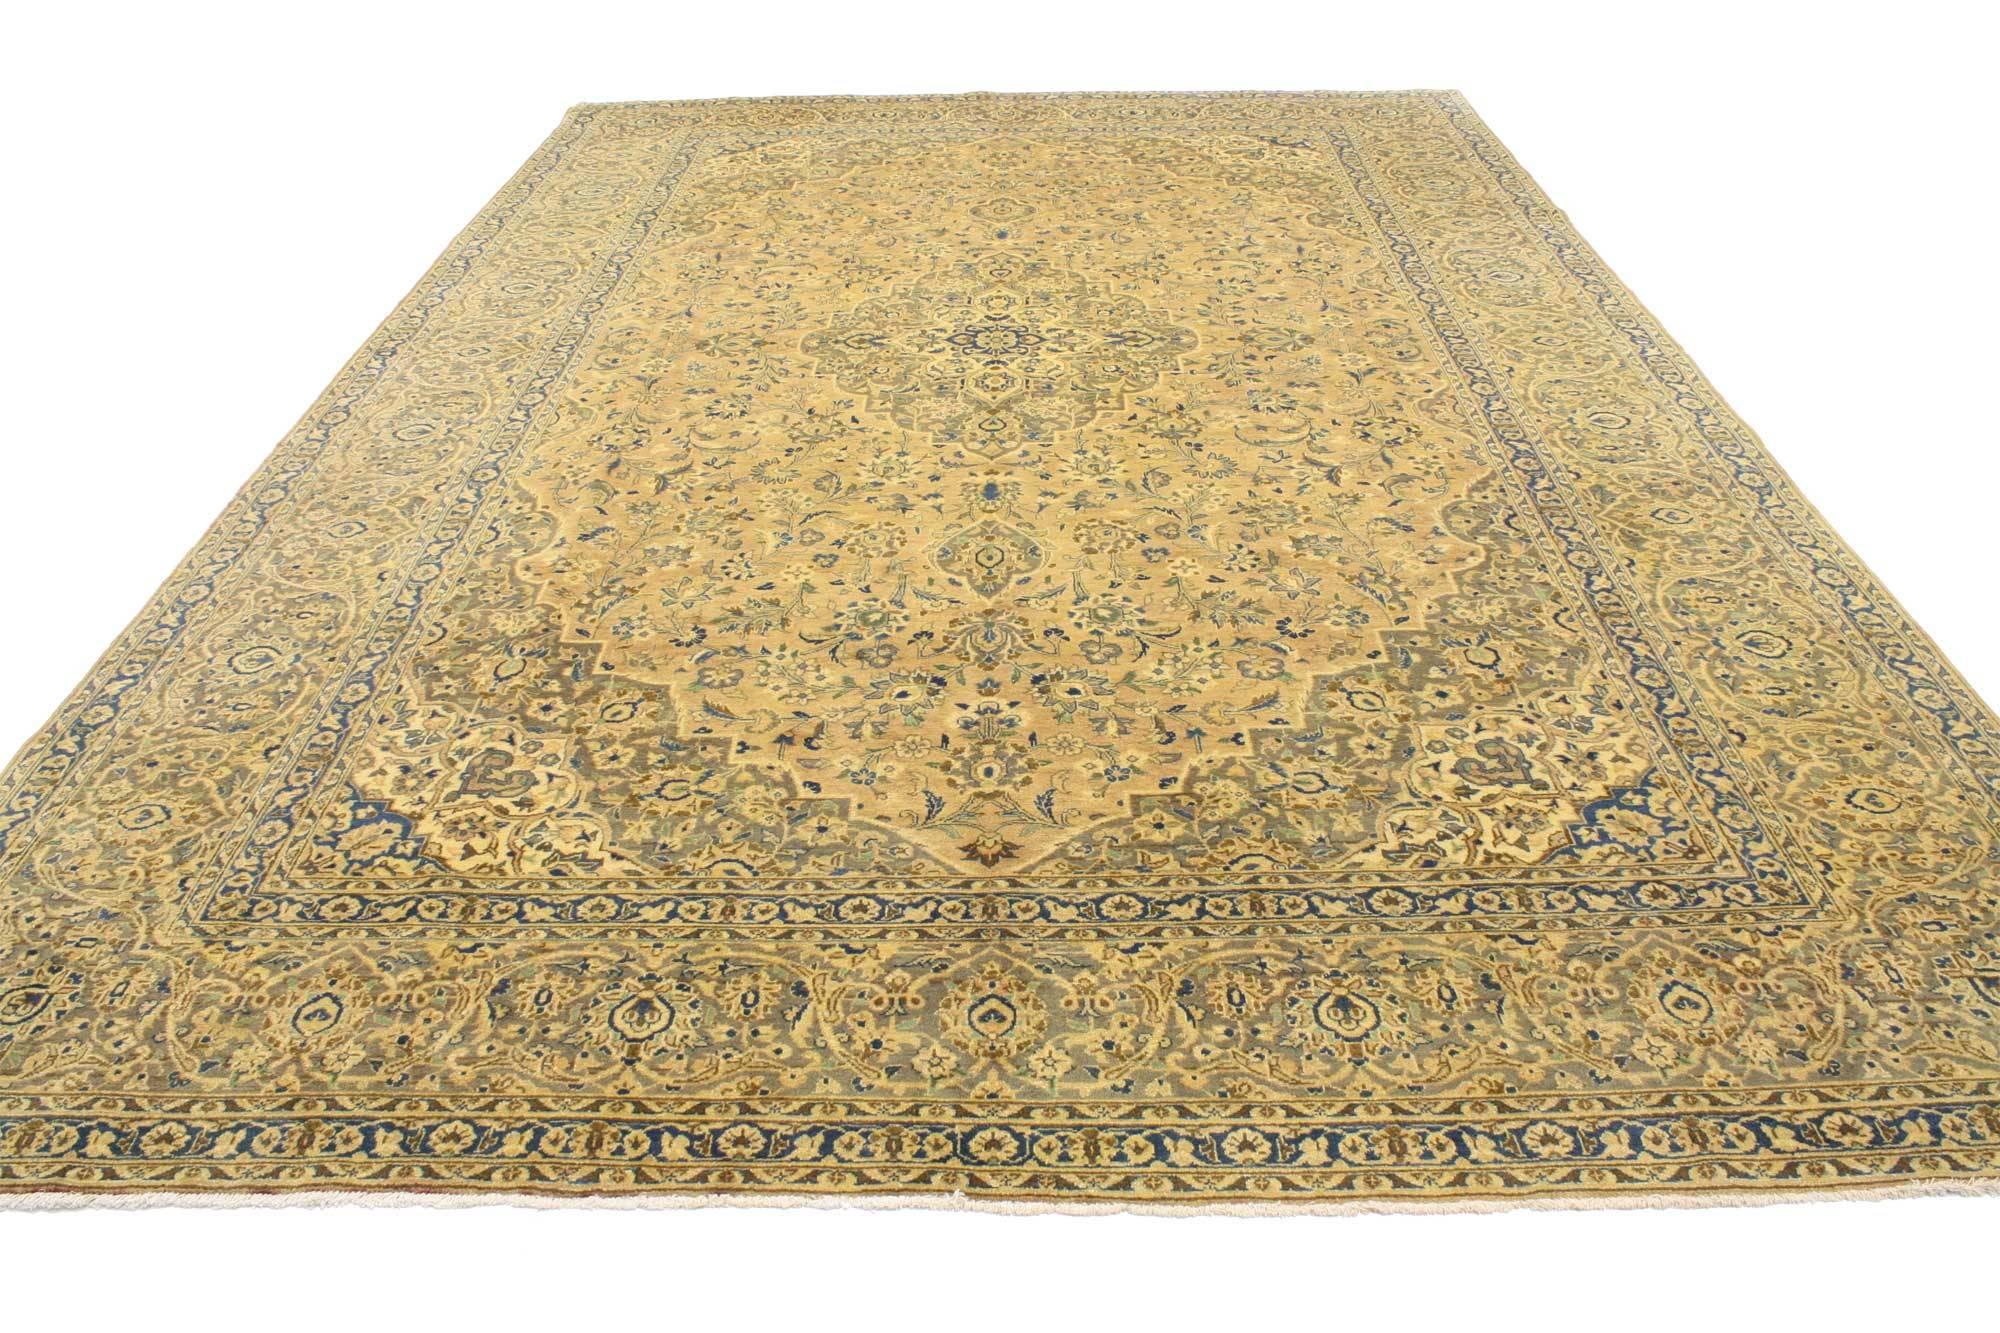 76306, vintage Persian Tabriz rug with traditional style. This hand-knotted wool vintage Persian Tabriz rug features an intricate medallion with an allover pattern surrounded by a classic border creating a well-balanced and timeless design. This